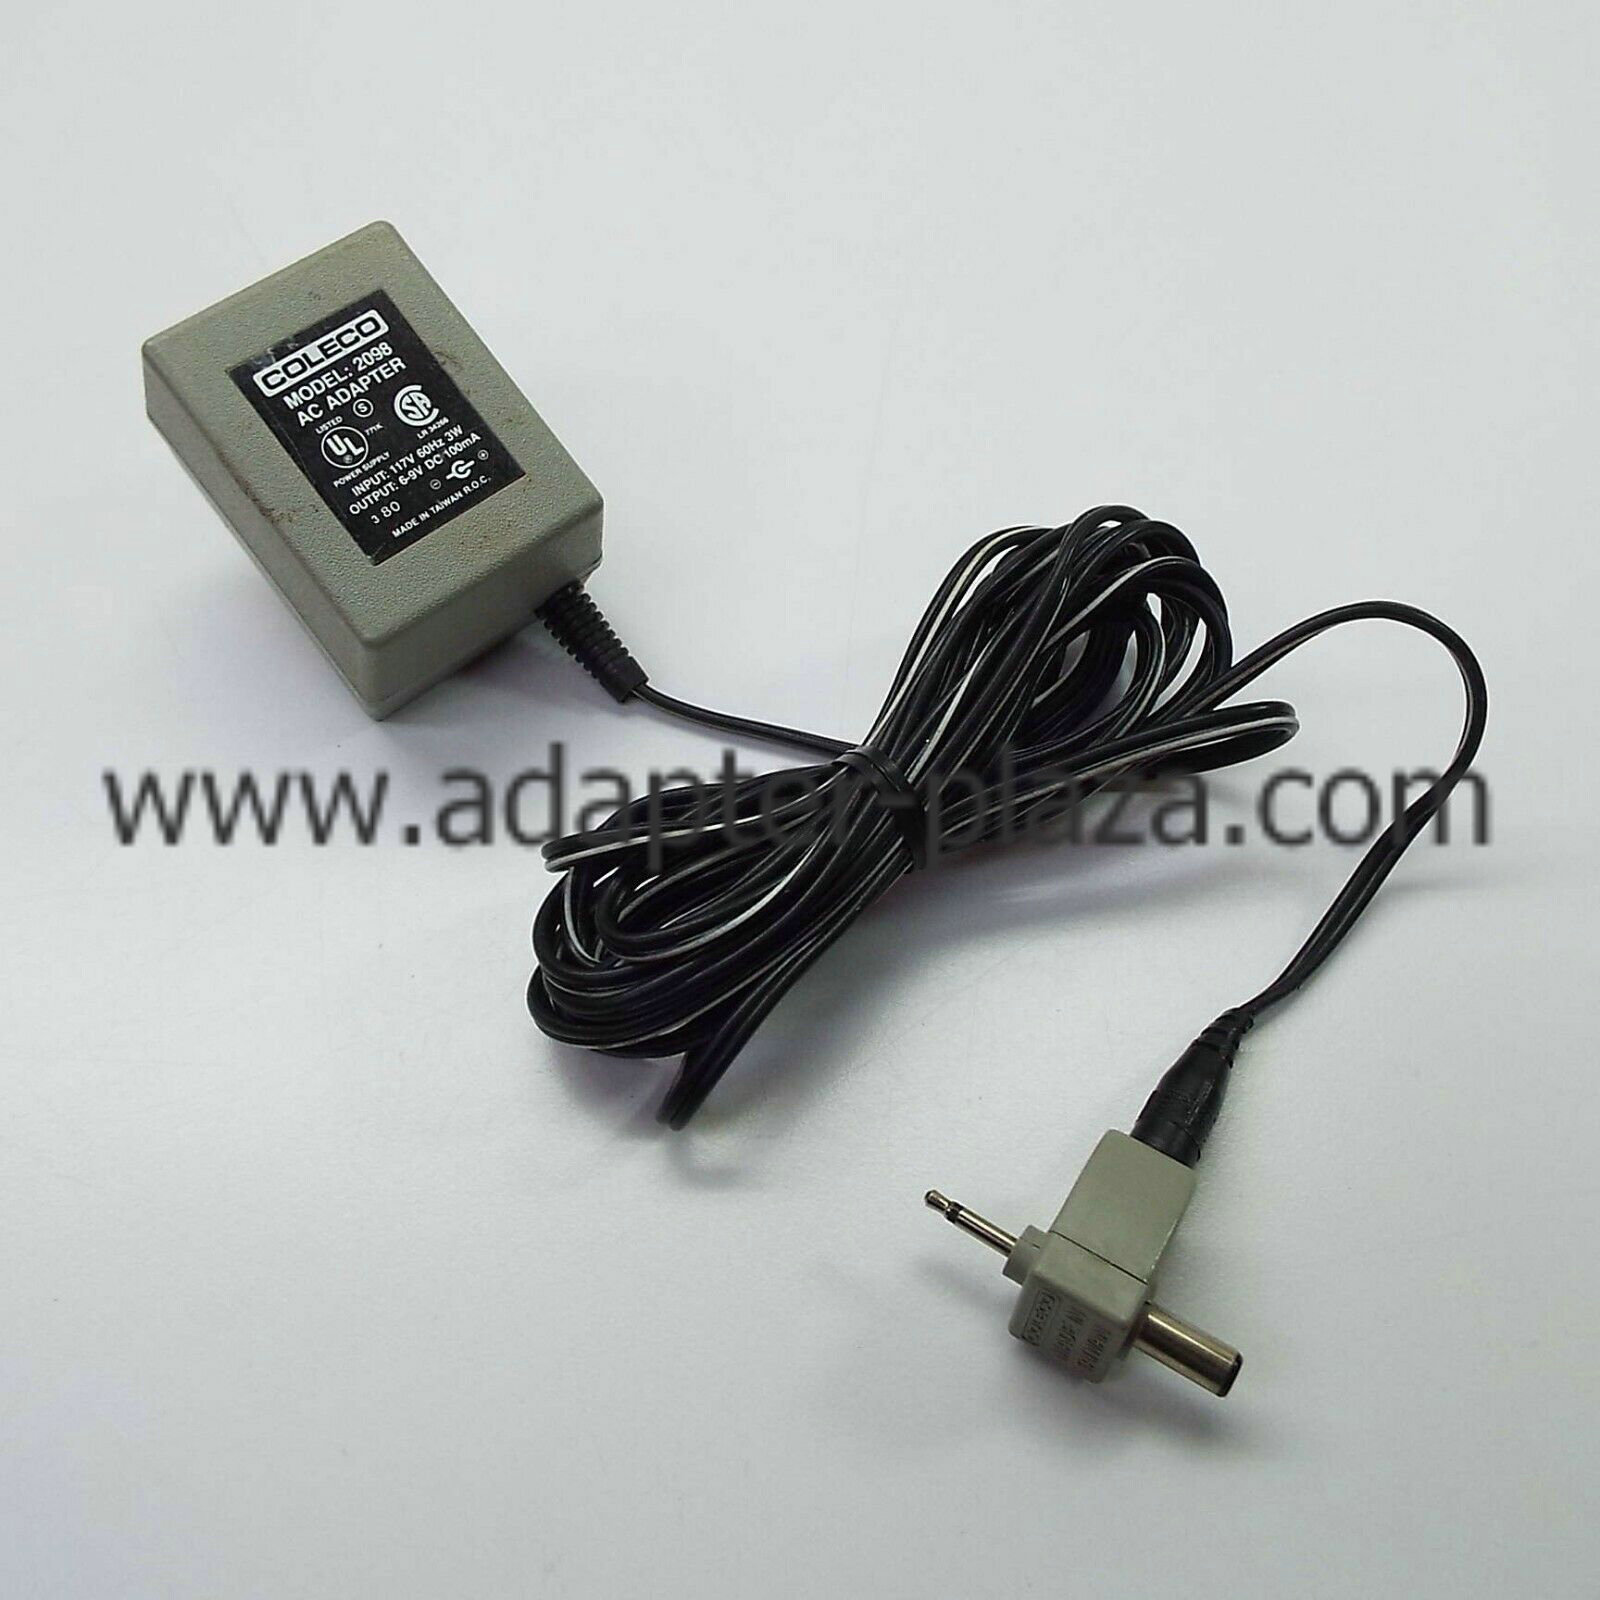 *Brand NEW* COLECO 6-9V DC 100MA AC DC Adapter MODEL 2098 POWER SUPPLY